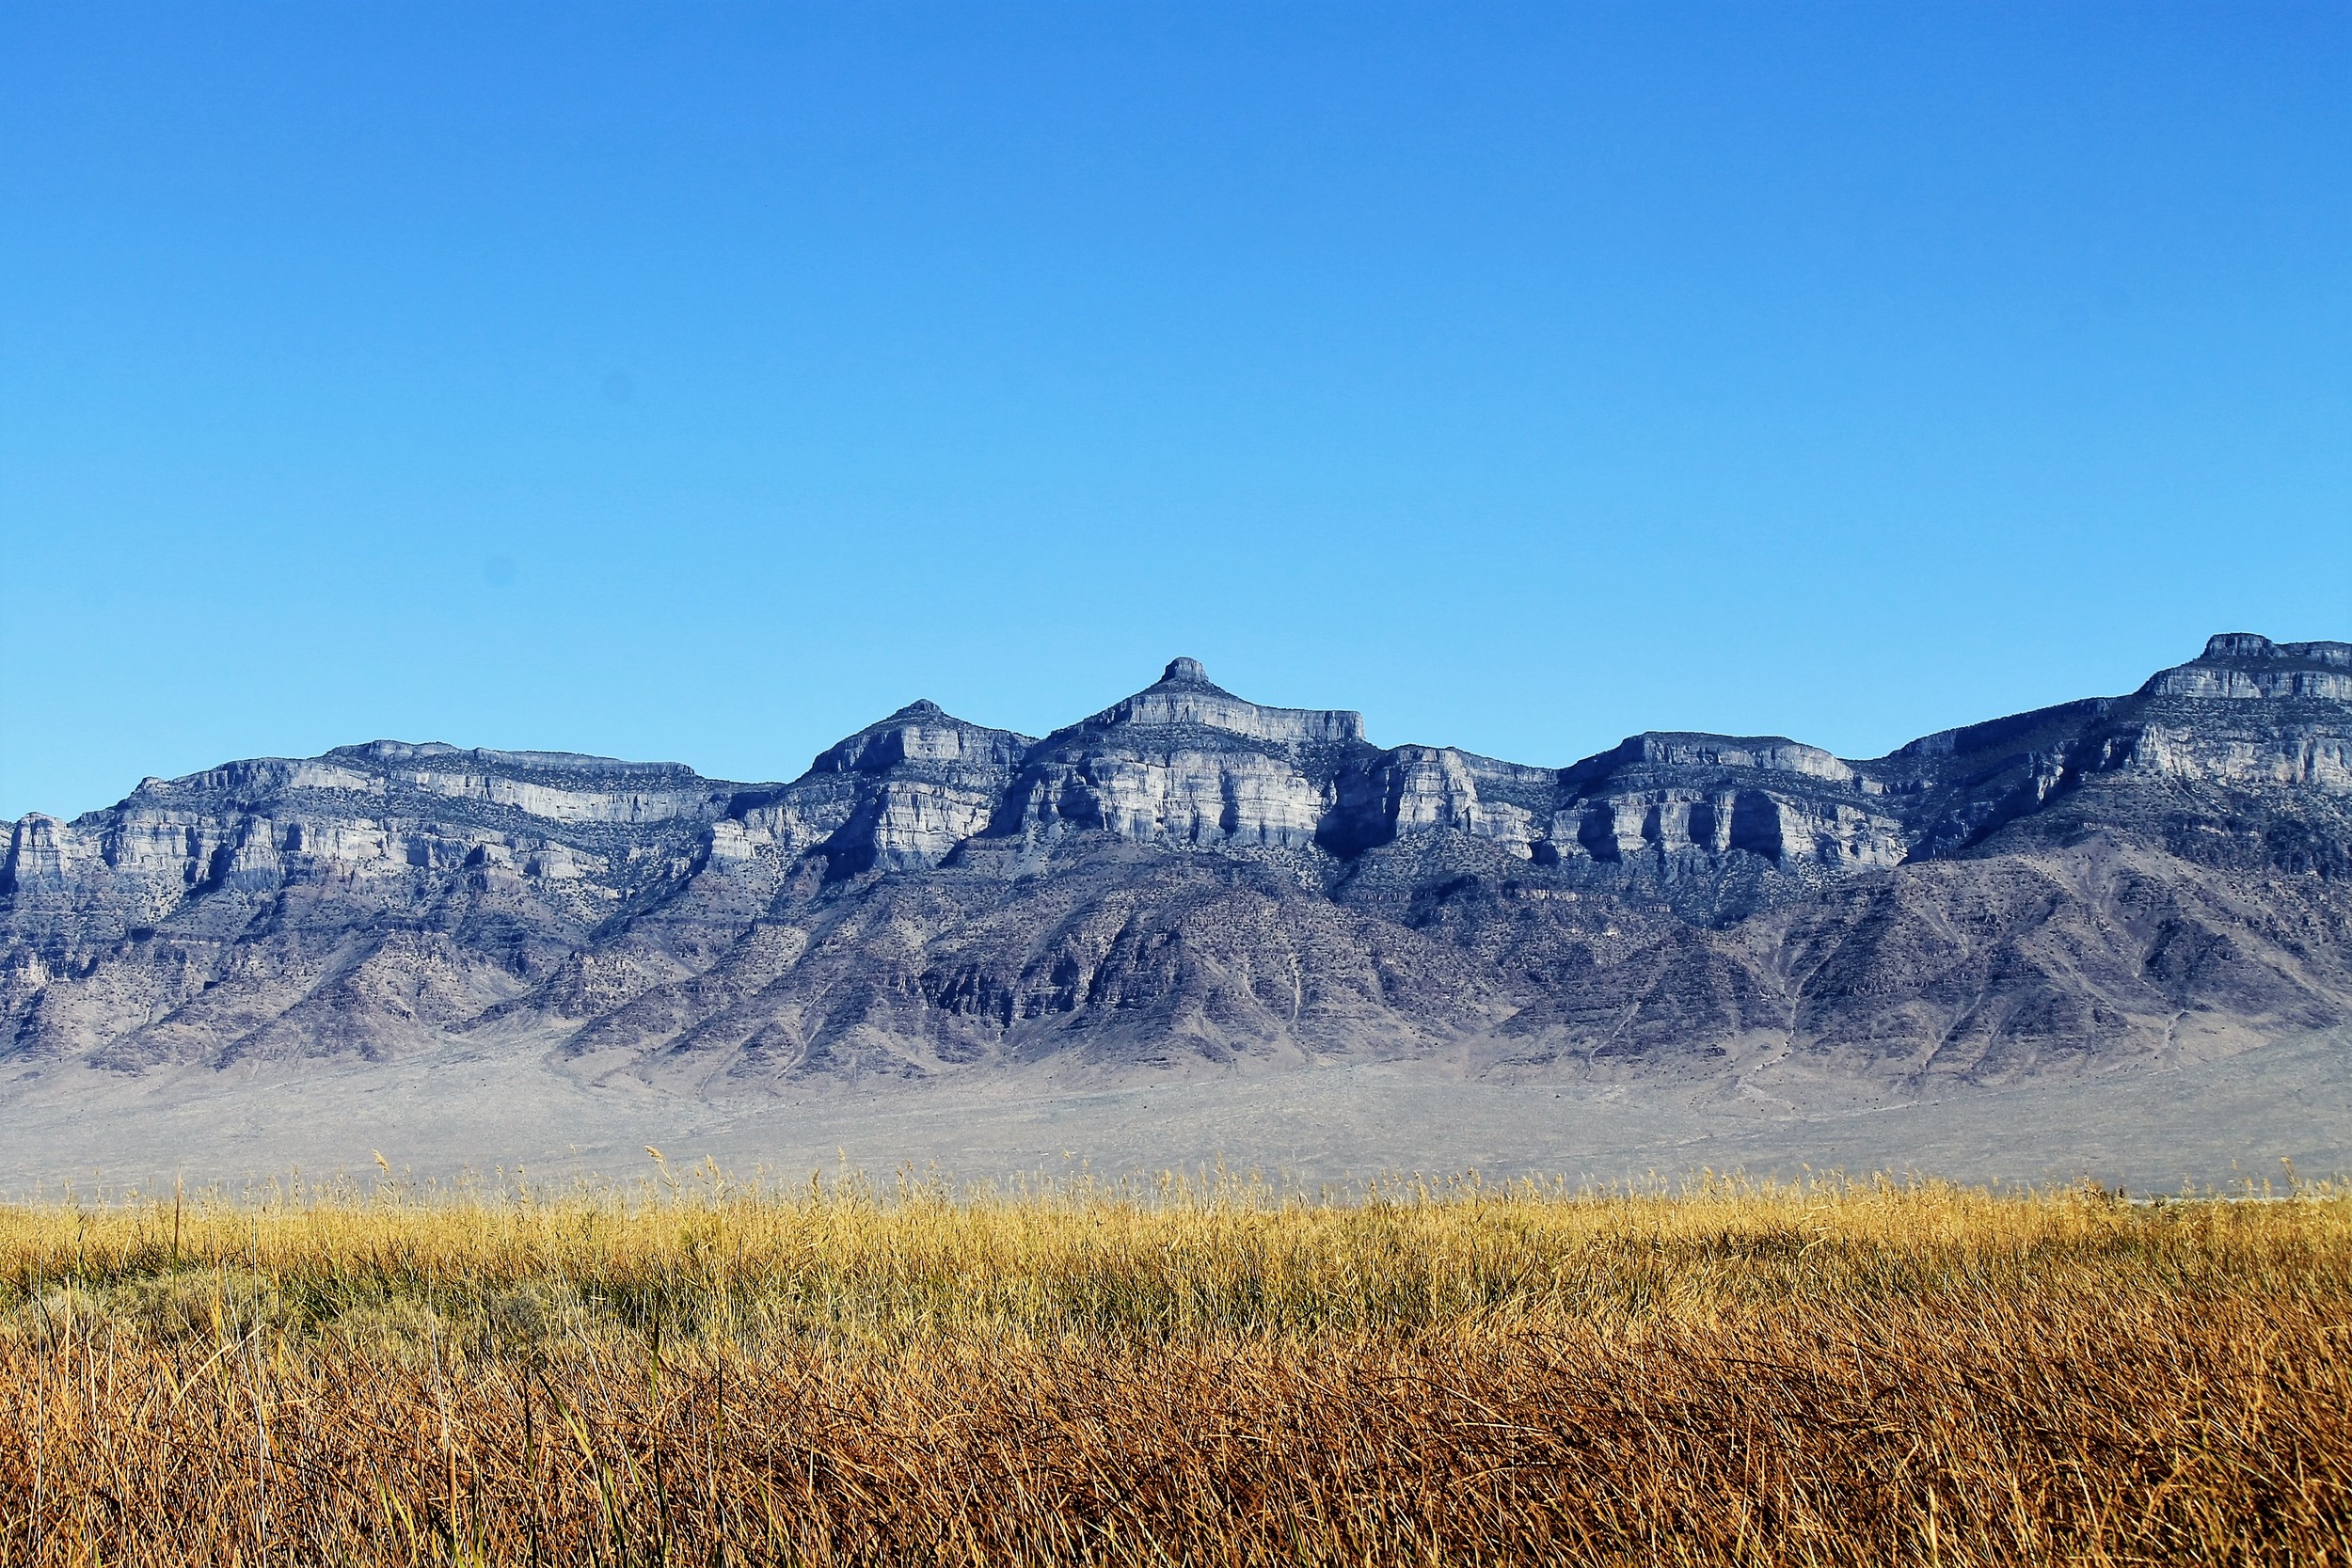 View of Tatow Knob (Swasey Mountain) above Coyote Springs